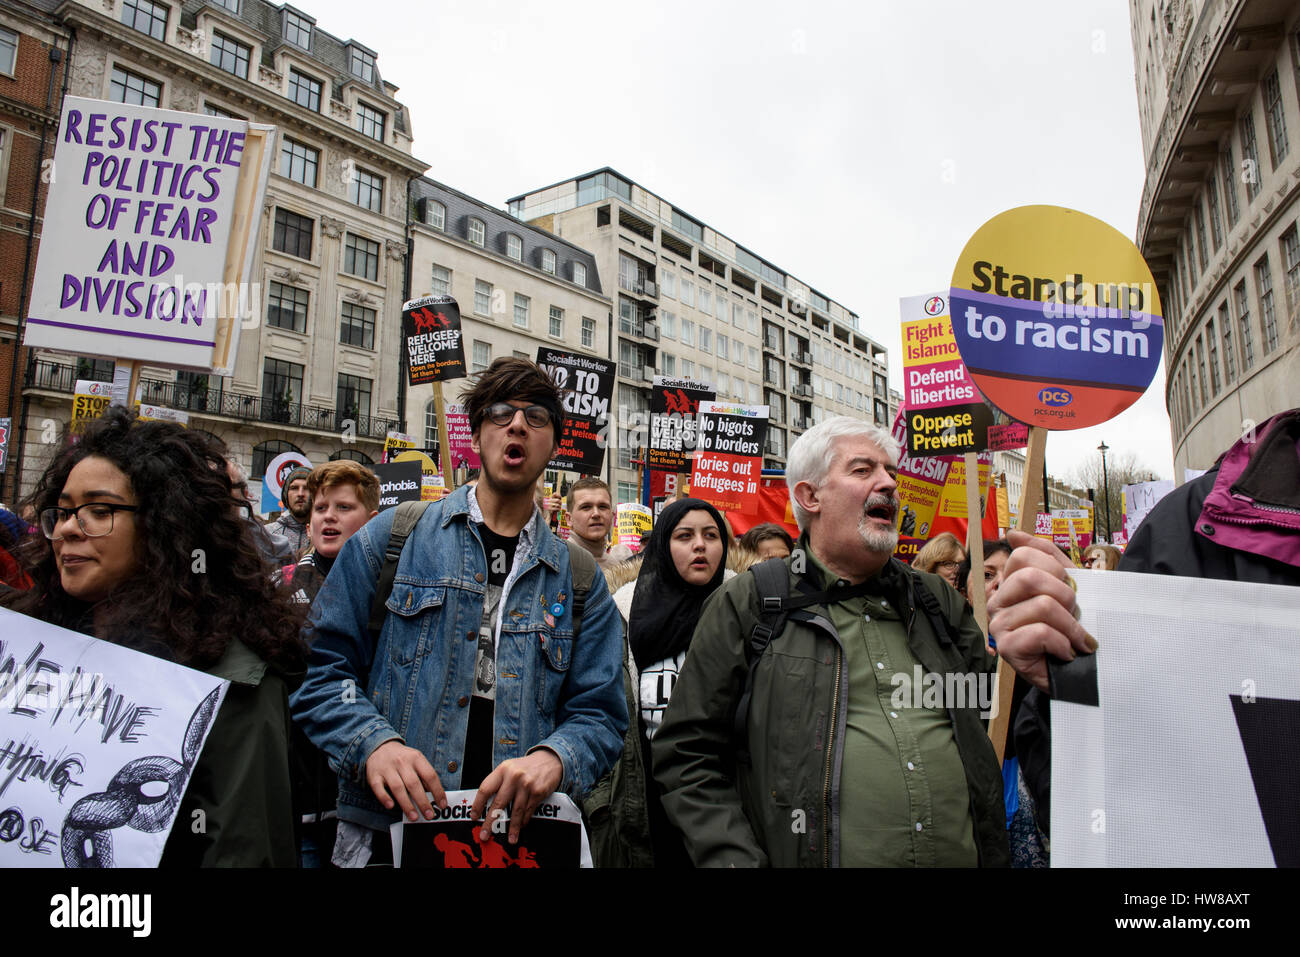 London, UK. 18th March 2017. Thousands of protesters march through central London protesting Against Racism on UN Anti-Racism Day. © ZEN - Zaneta Razaite / Alamy Live News Stock Photo